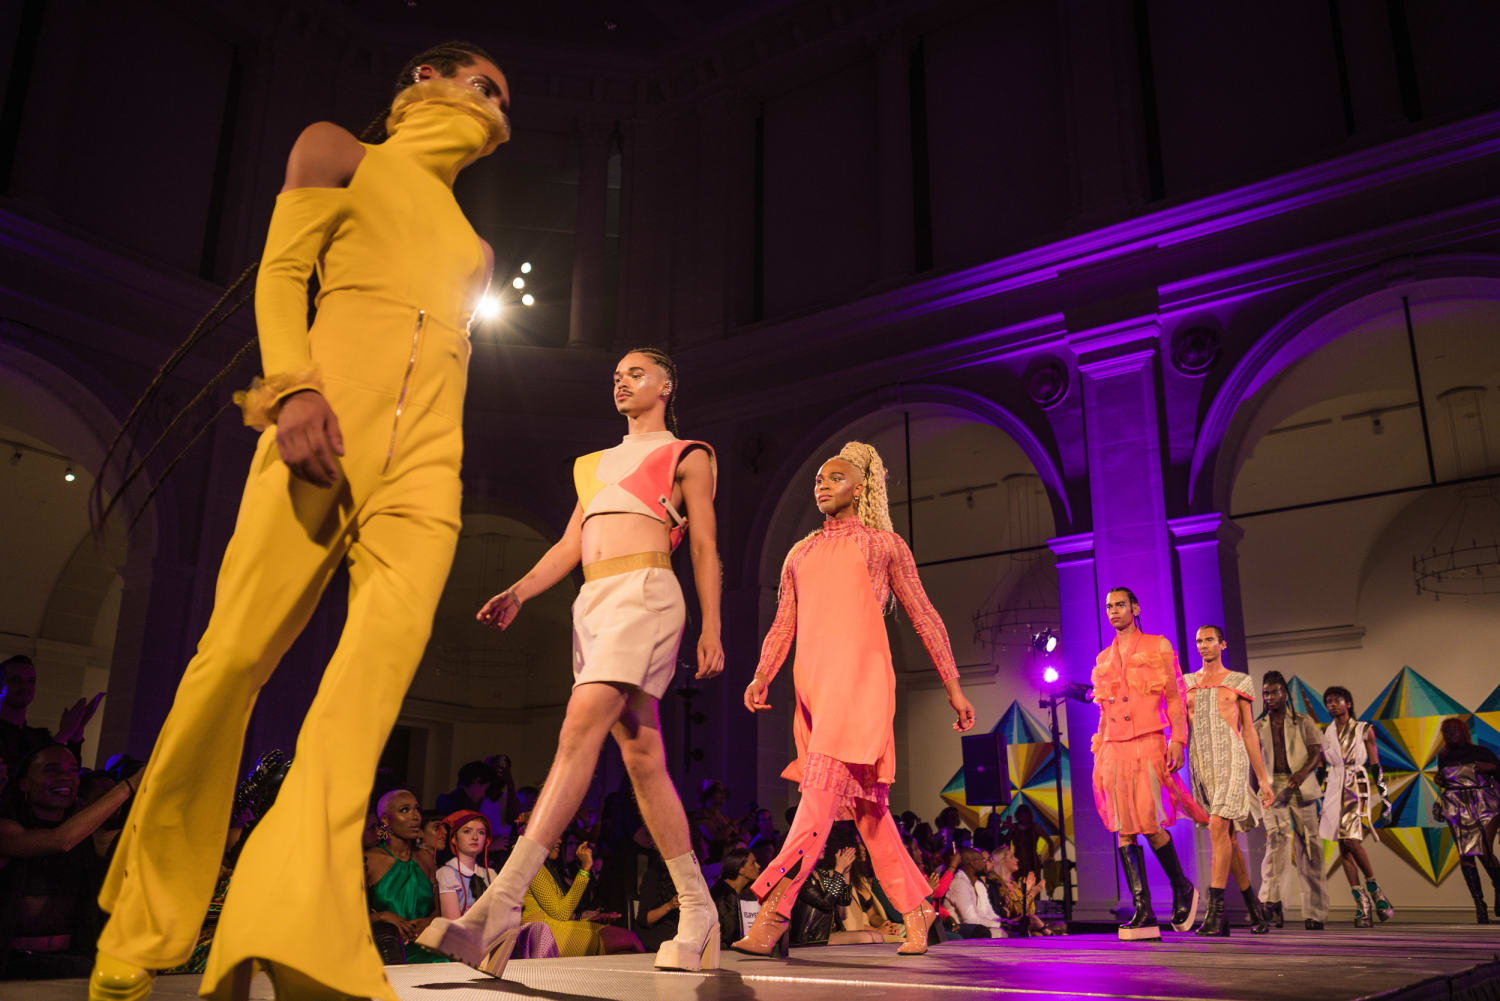 The 'largest queer fashion' show returns to kick off New York Fashion Week